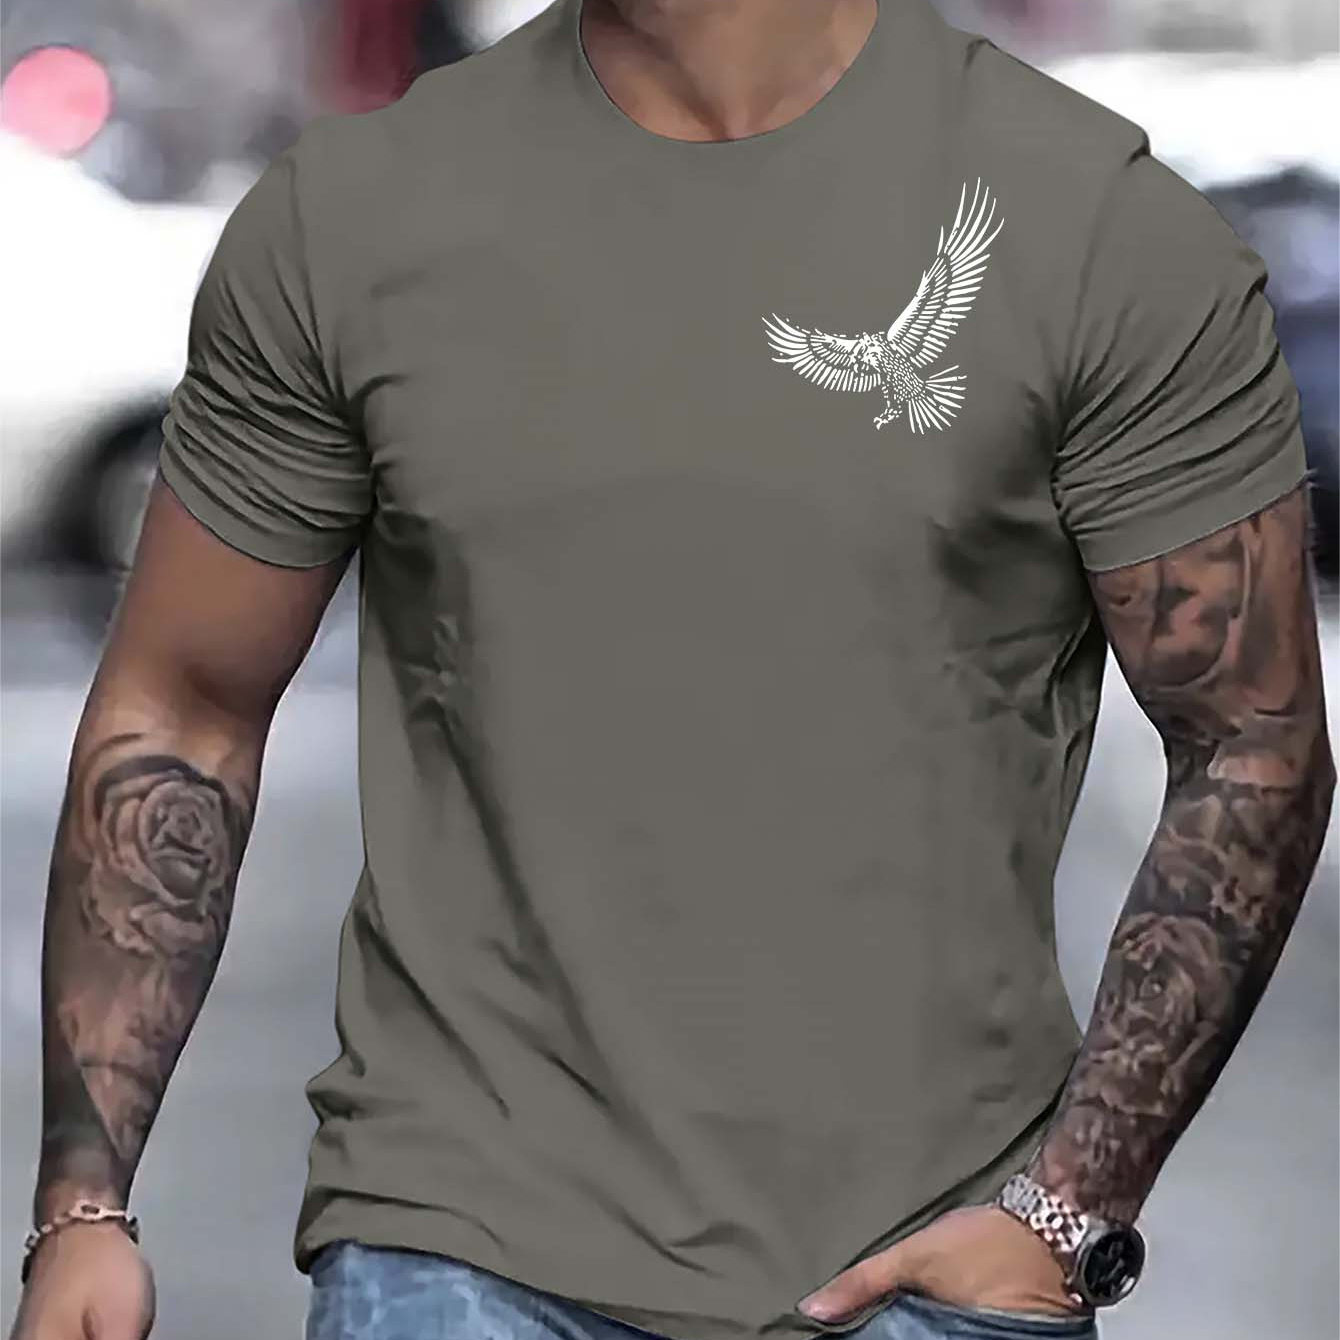 

Eagle Print, Men's Graphic Design Crew Neck Active T-shirt, Casual Comfy Tees Tshirts For Summer, Men's Clothing Tops For Daily Gym Workout Running